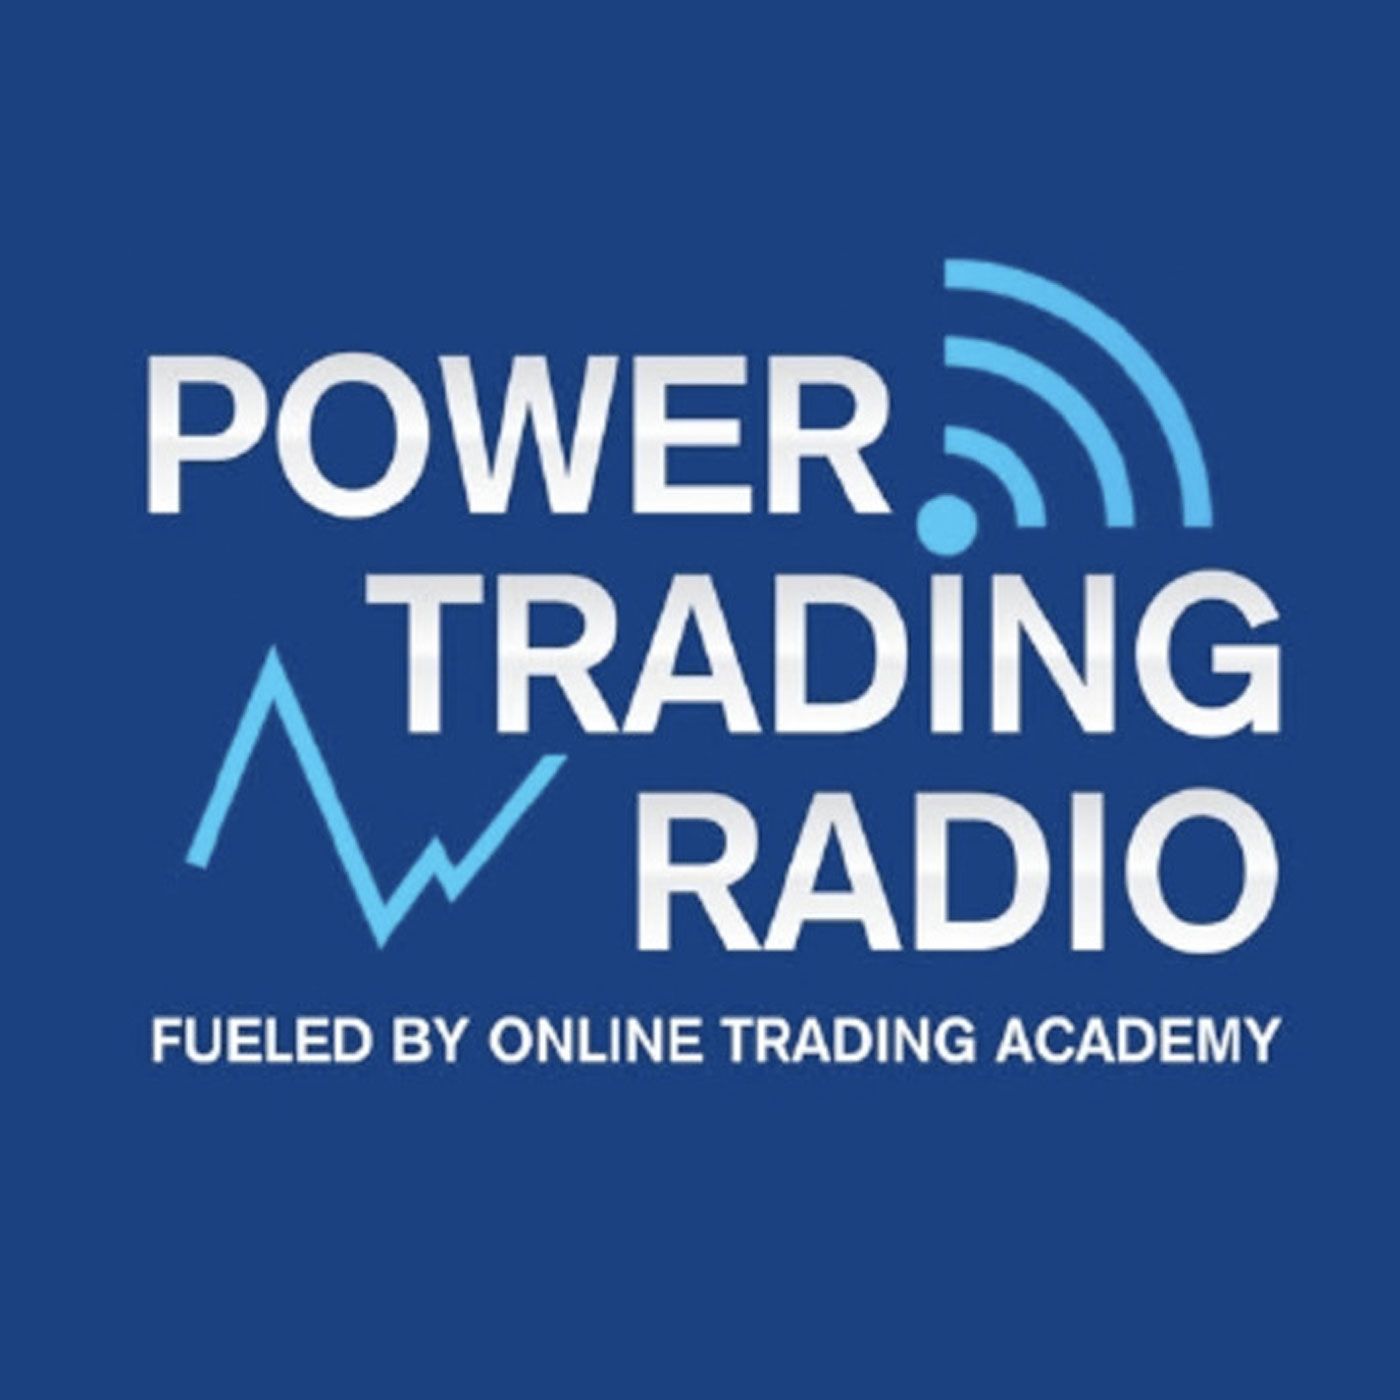 Online Trading Academy 12-11-16